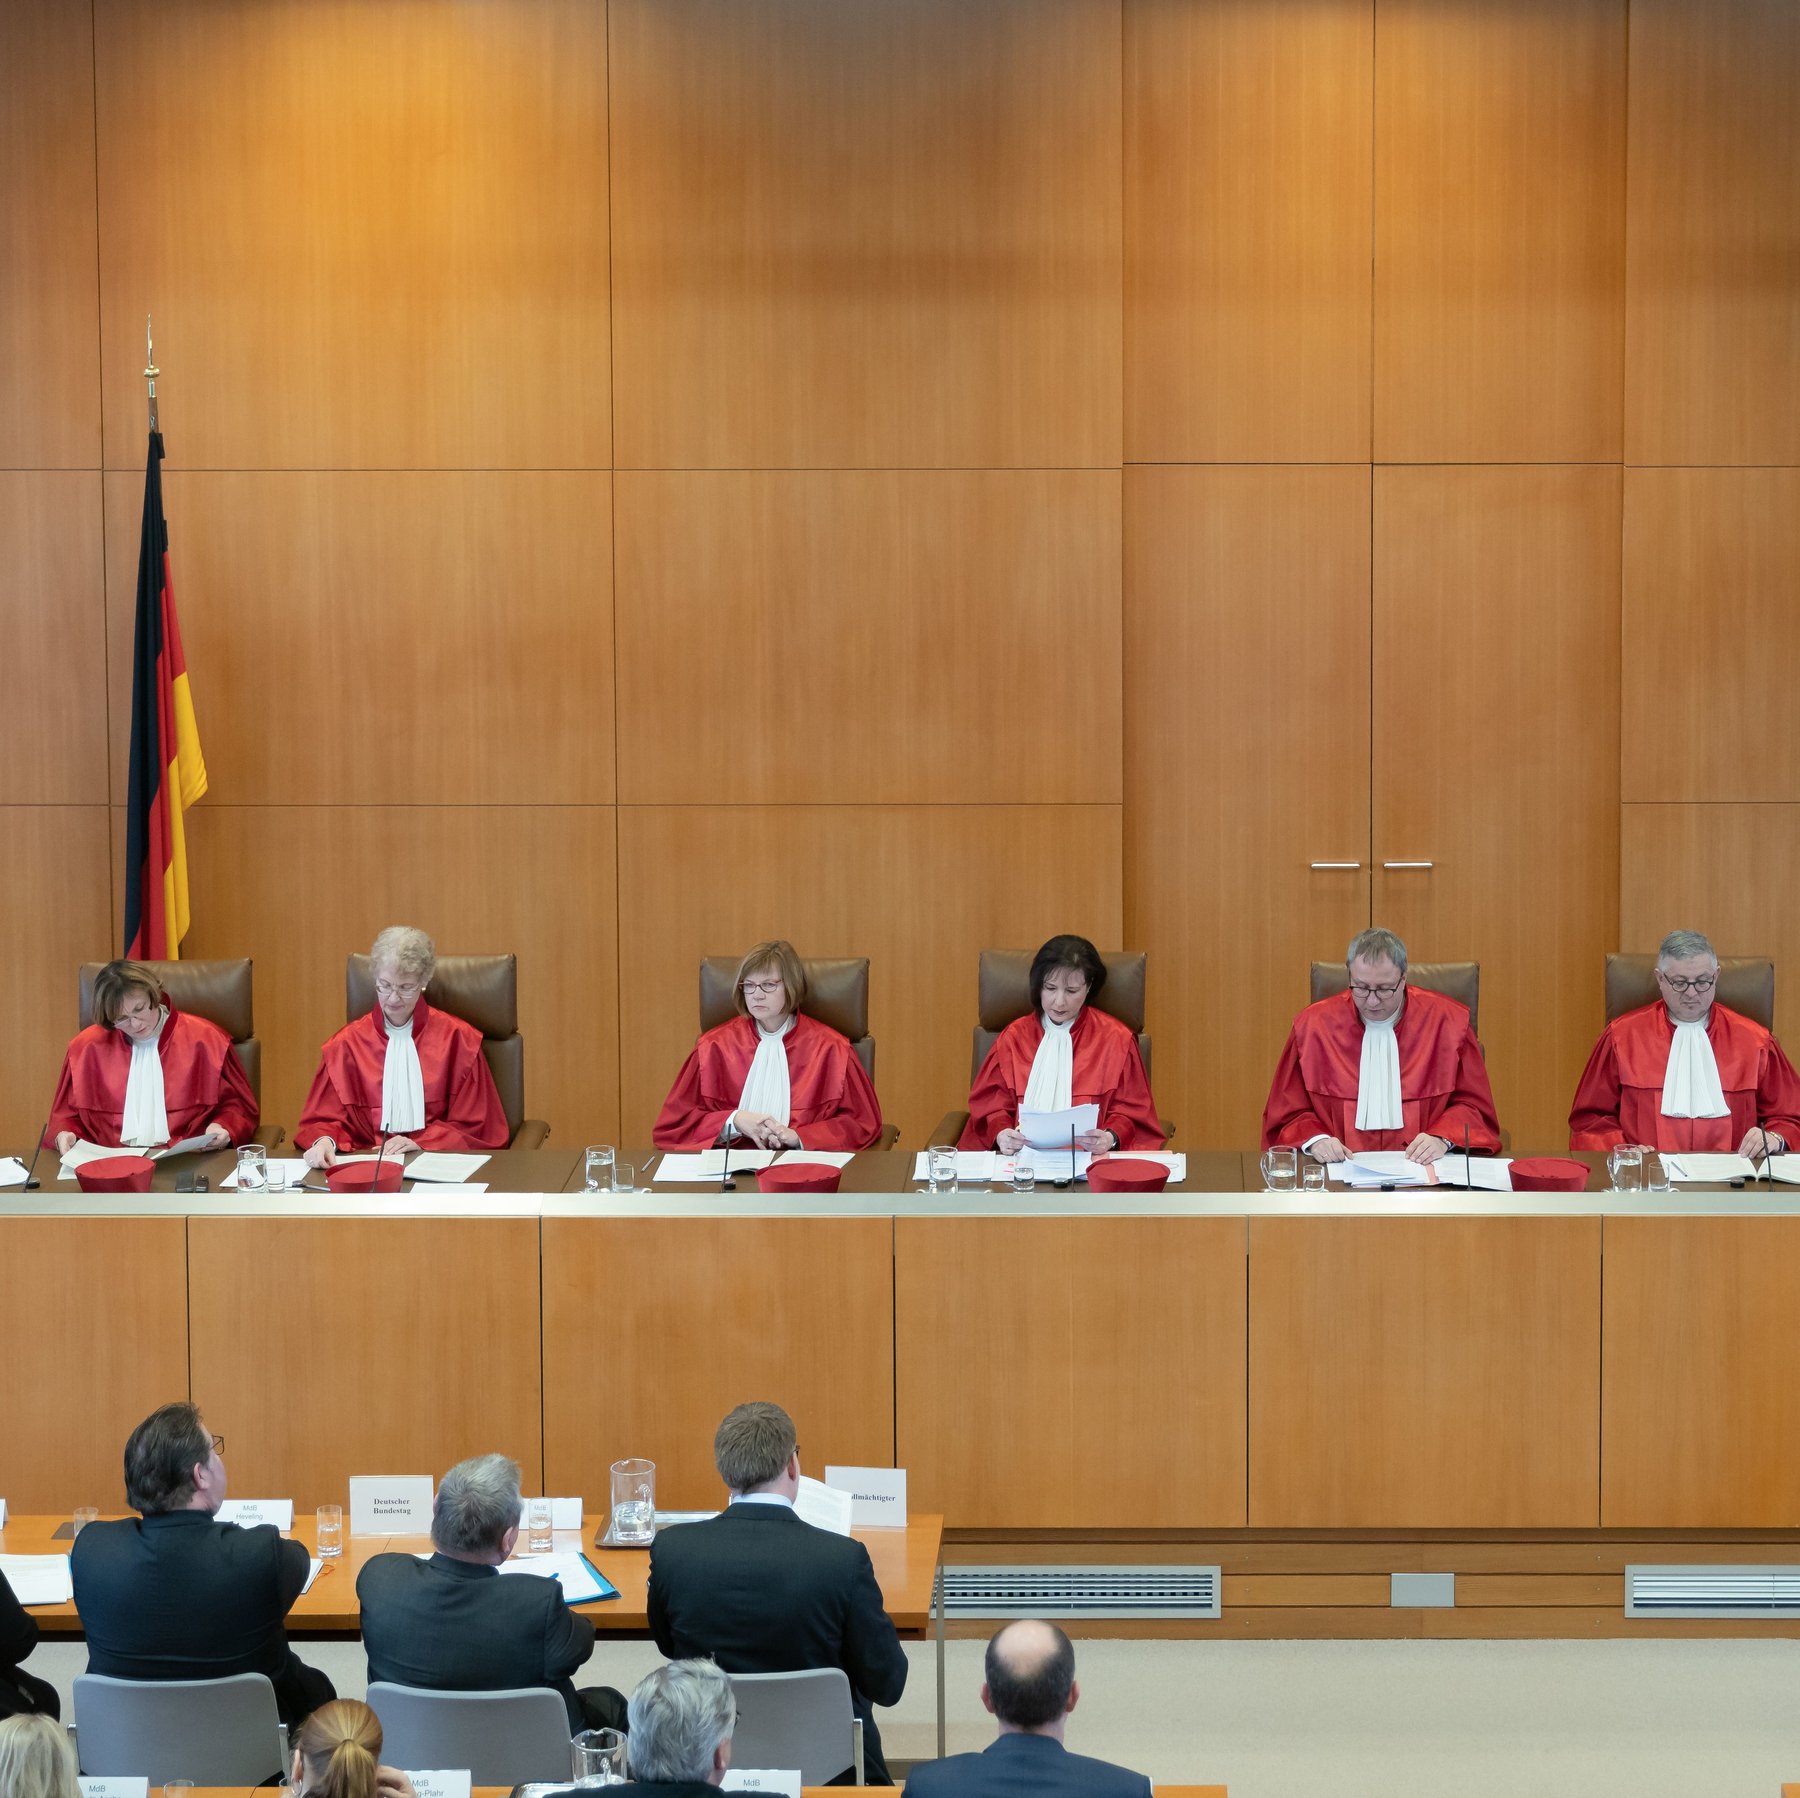 German Court Rules That COVID-19 Lockdowns Are Unconstitutional